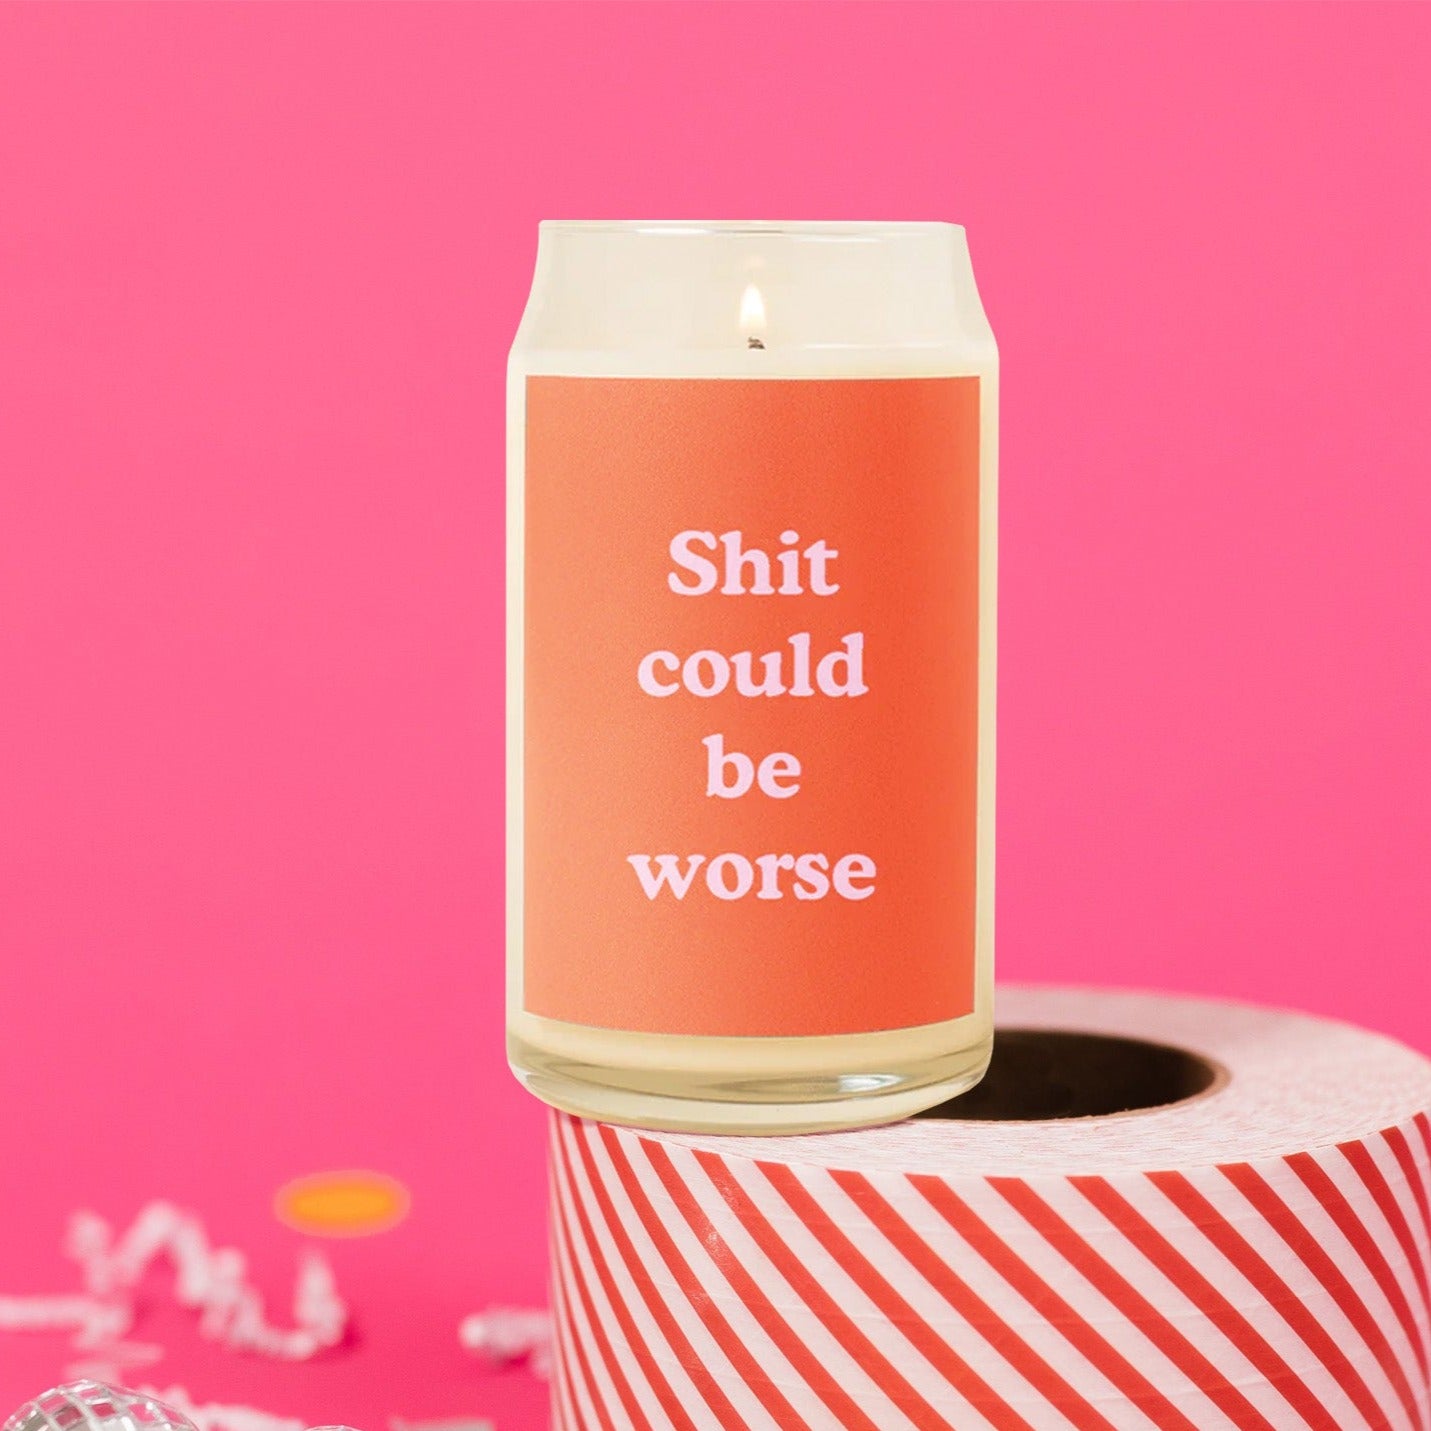 On a hot pink background sits a candle with white crinkle and big, colorful confetti scattered around. The candle is lit and has an orange label on the front that says "Shit could be worse" in a bubblegum pink, thick serif font.